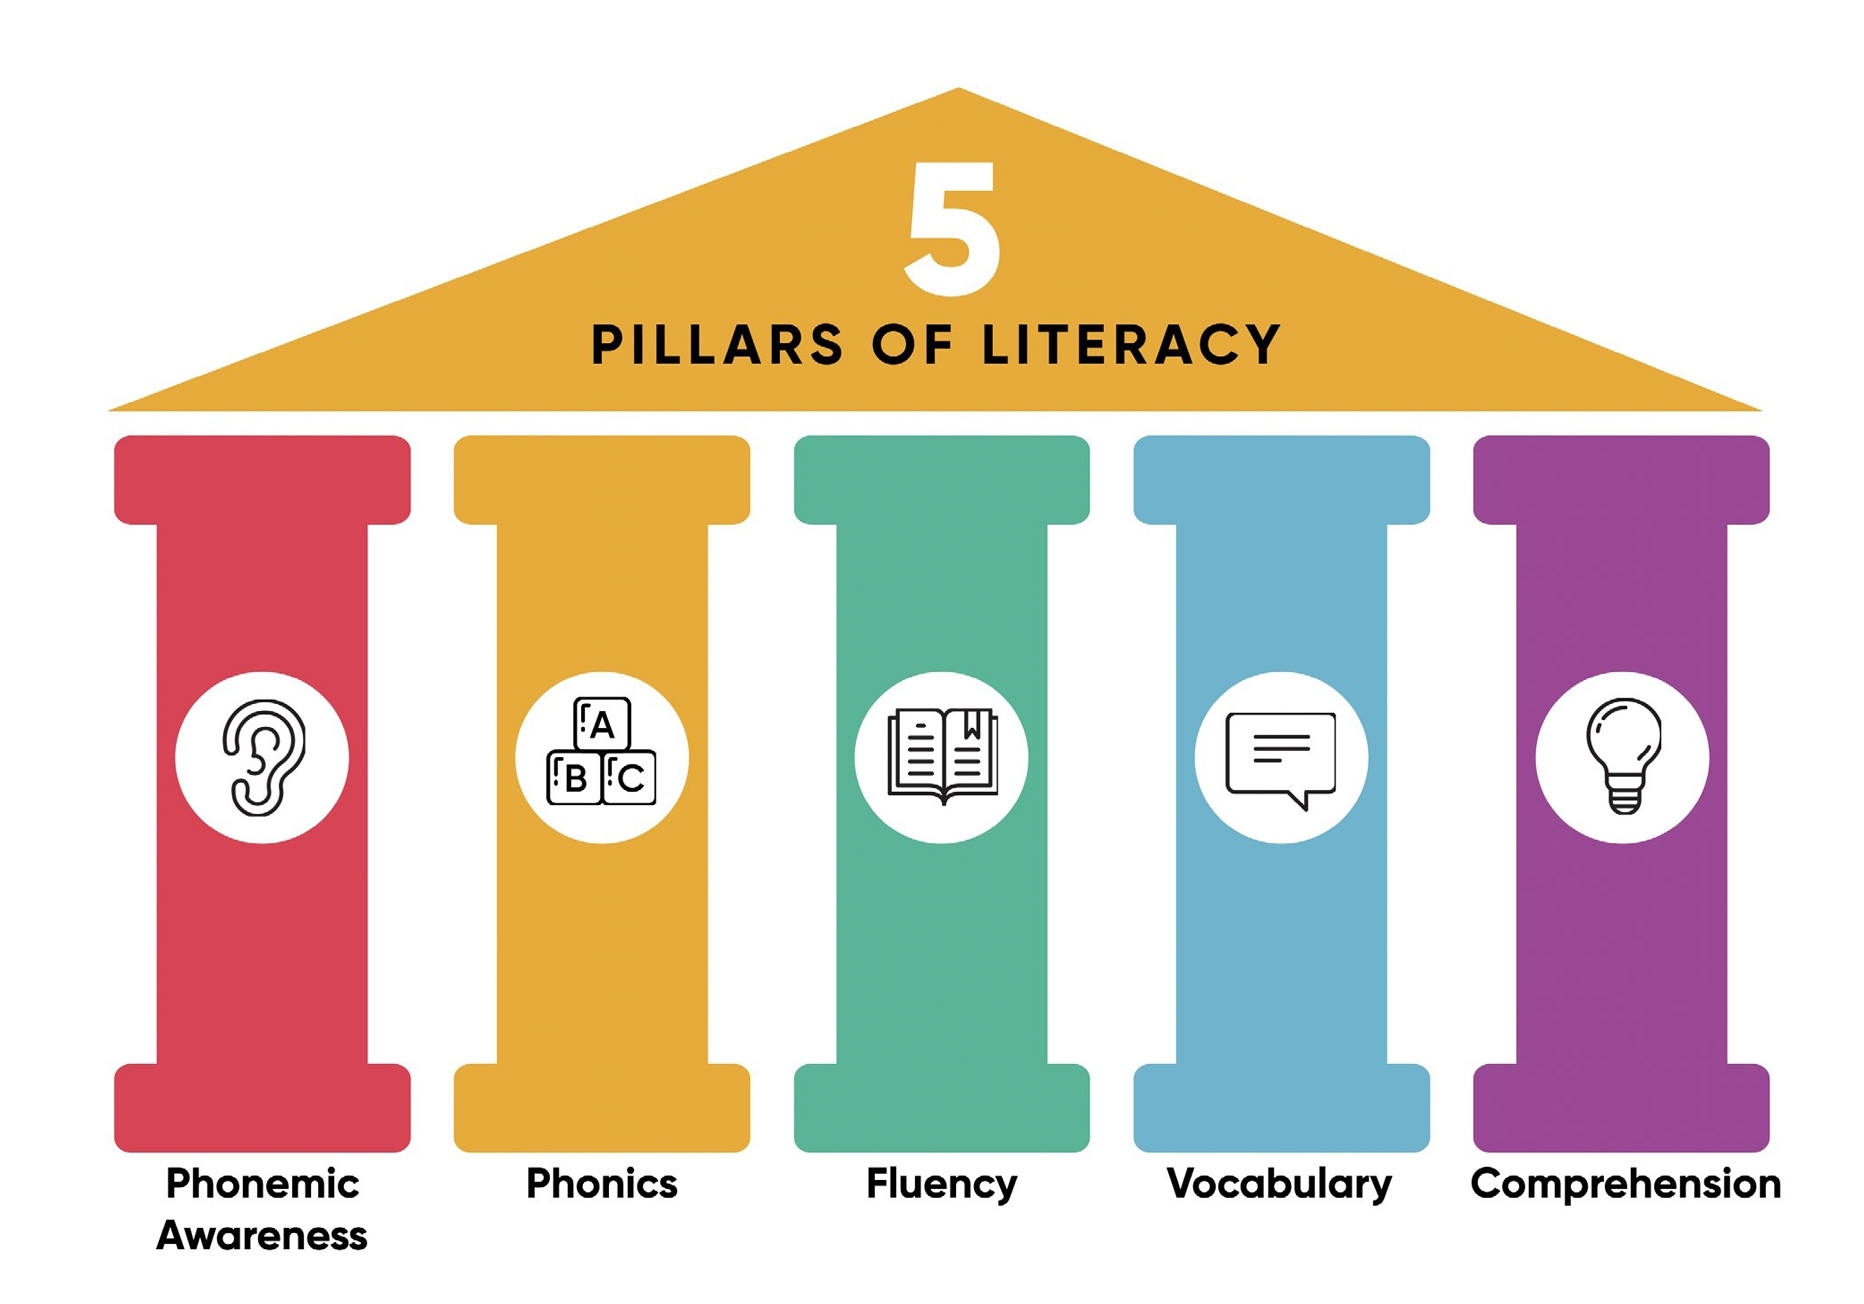 5 pillars of literacy which include phonemic awareness, phonics, fluency, vocabulary, and comprehension.